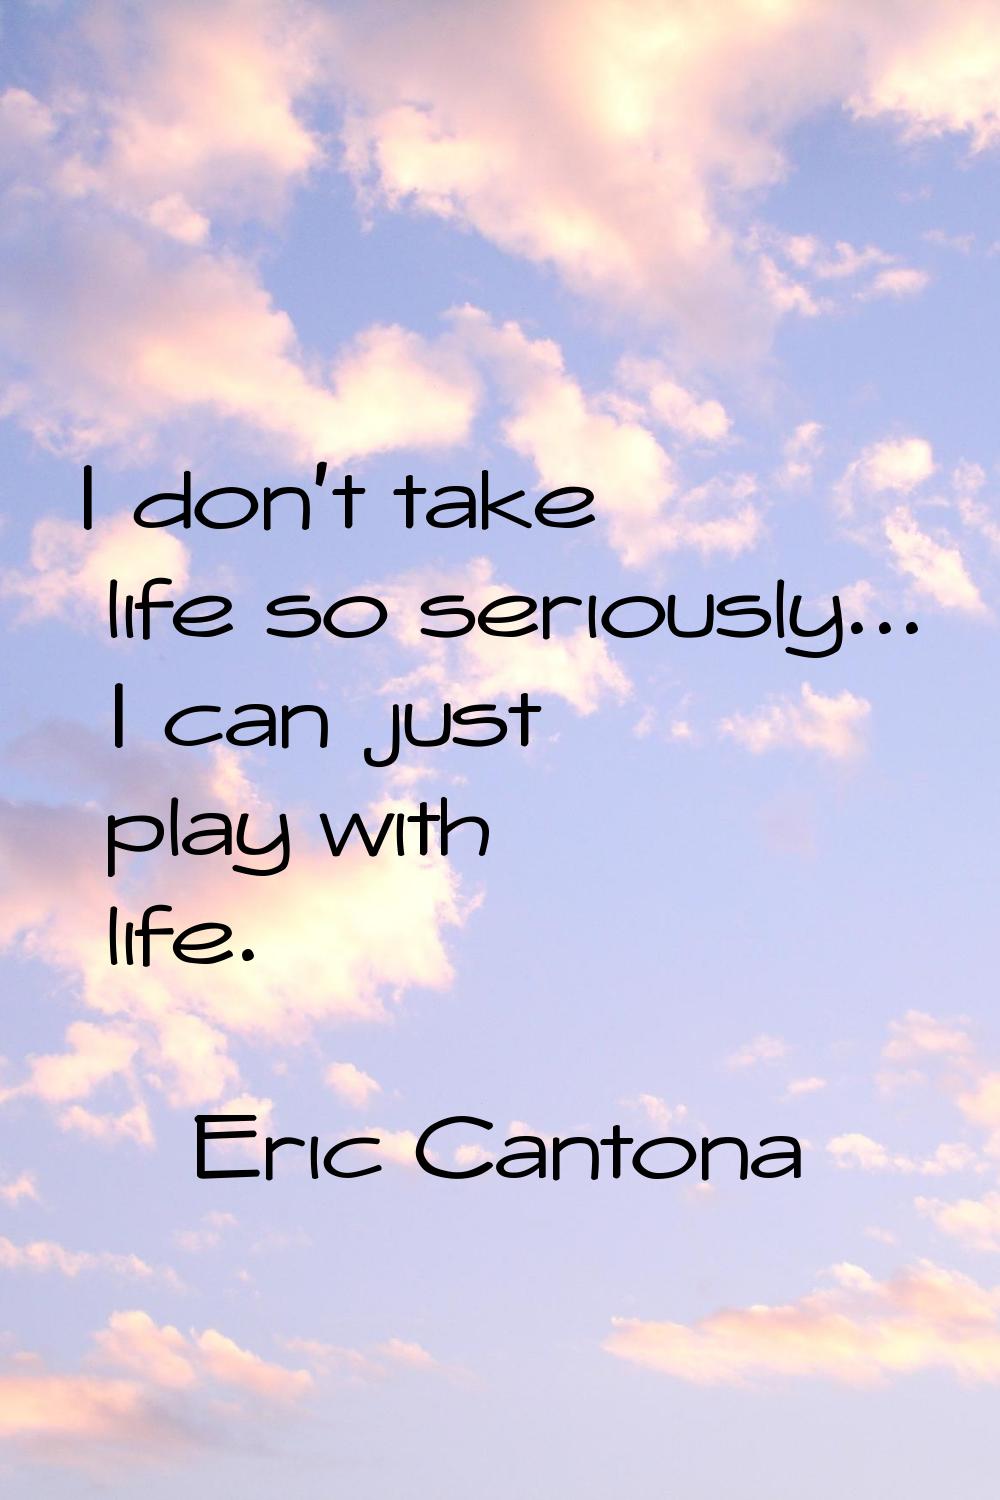 I don't take life so seriously... I can just play with life.